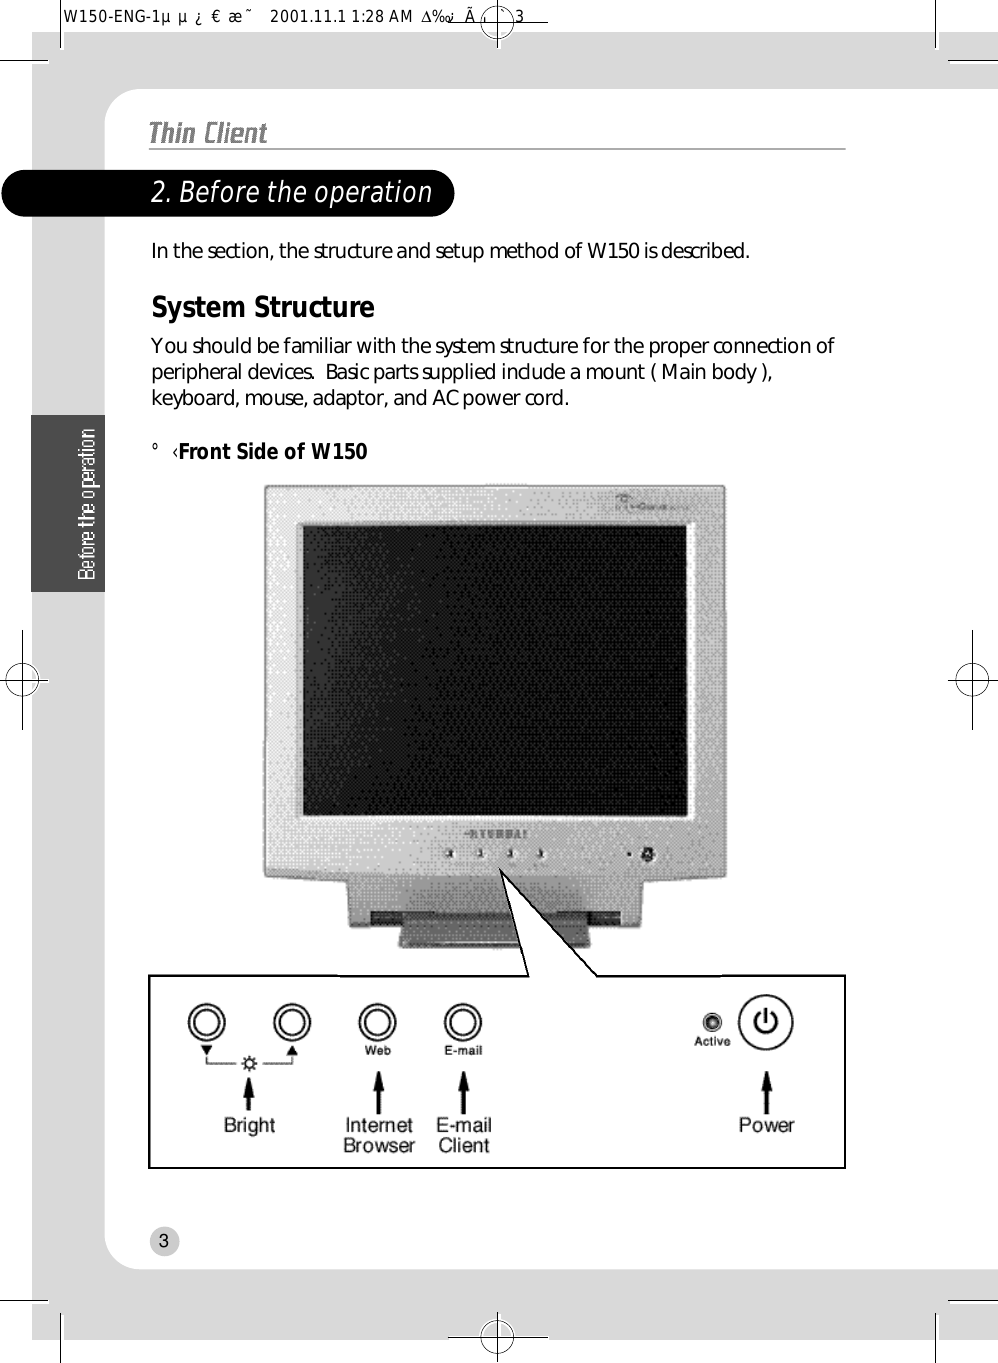 32. Before the operation In the section, the structure and setup method of W150 is described.System Structure   You should be familiar with the system structure for the proper connection ofperipheral devices.  Basic parts supplied include a mount ( Main body ),keyboard, mouse, adaptor, and AC power cord.°‹Front Side of W150 W150-ENG-1µµ¿¤æ˜  2001.11.1 1:28 AM  ∆‰¿Ã¡ˆ3